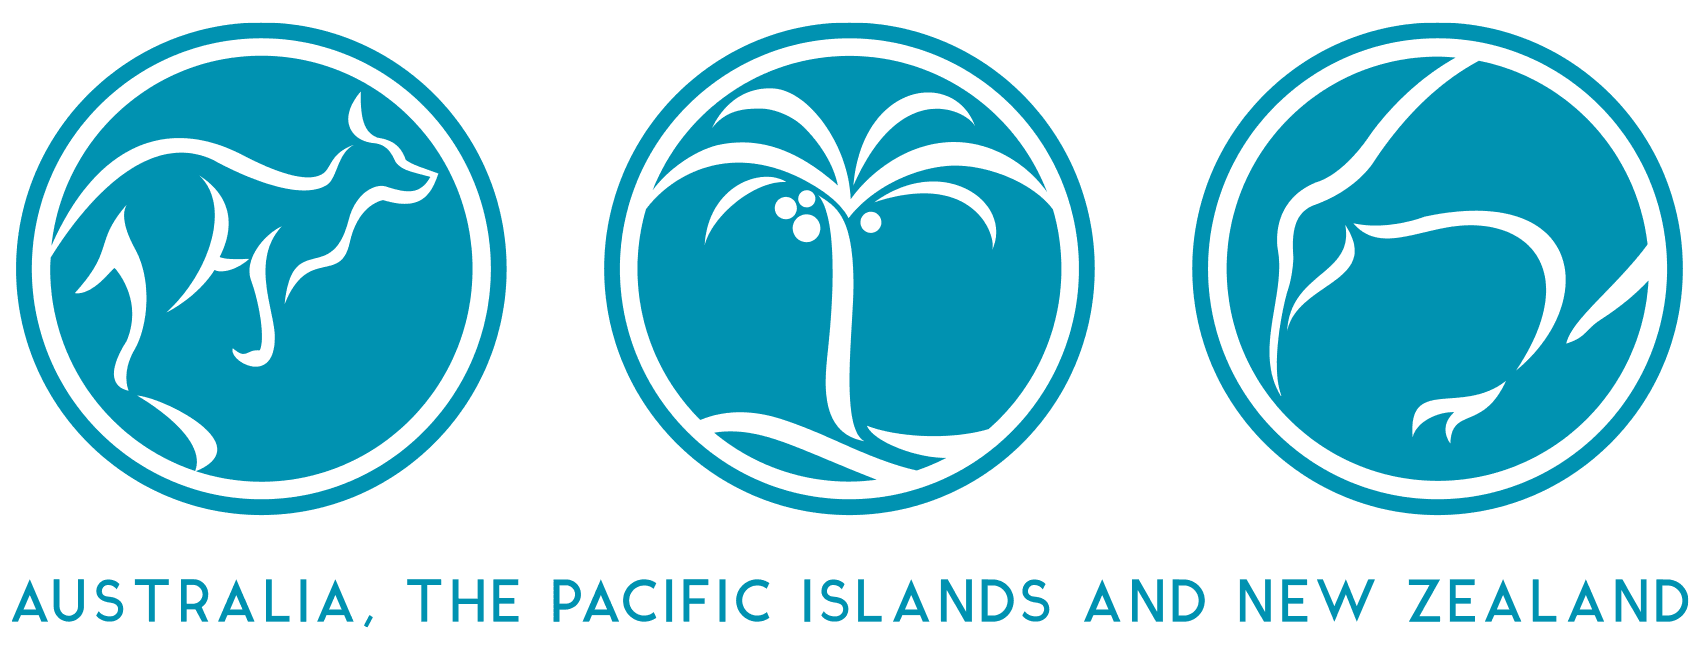 Pacific Travel regions, New Zealand, Australia, and the Pacific Island.